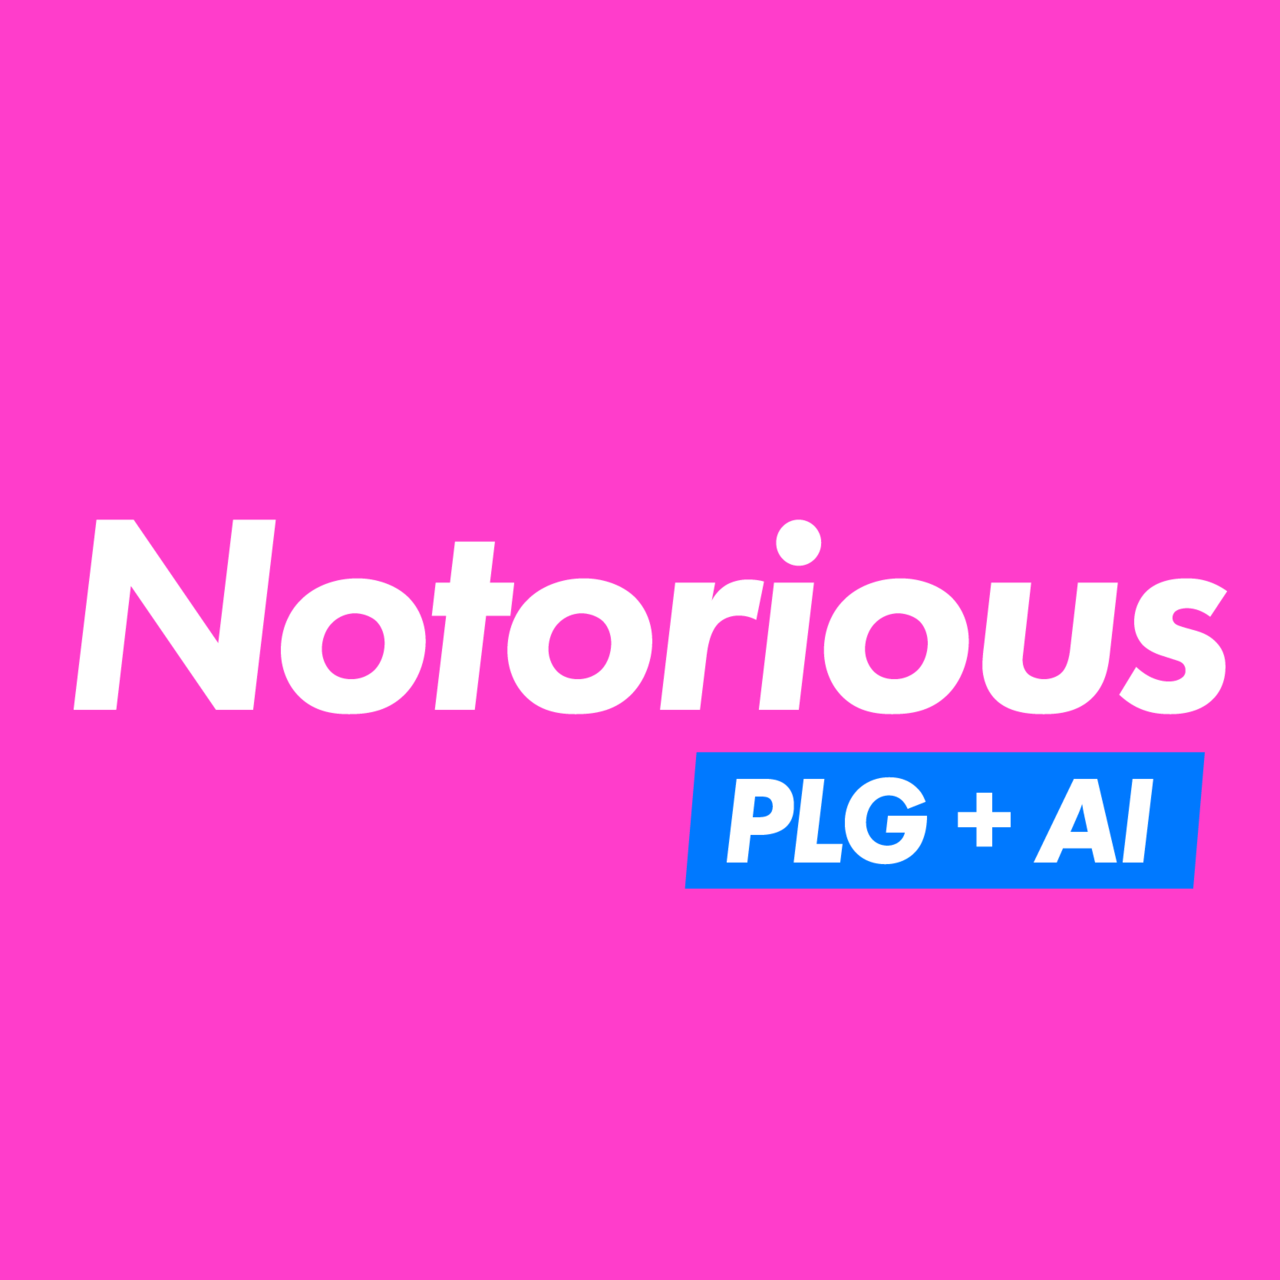 Artwork for Notorious